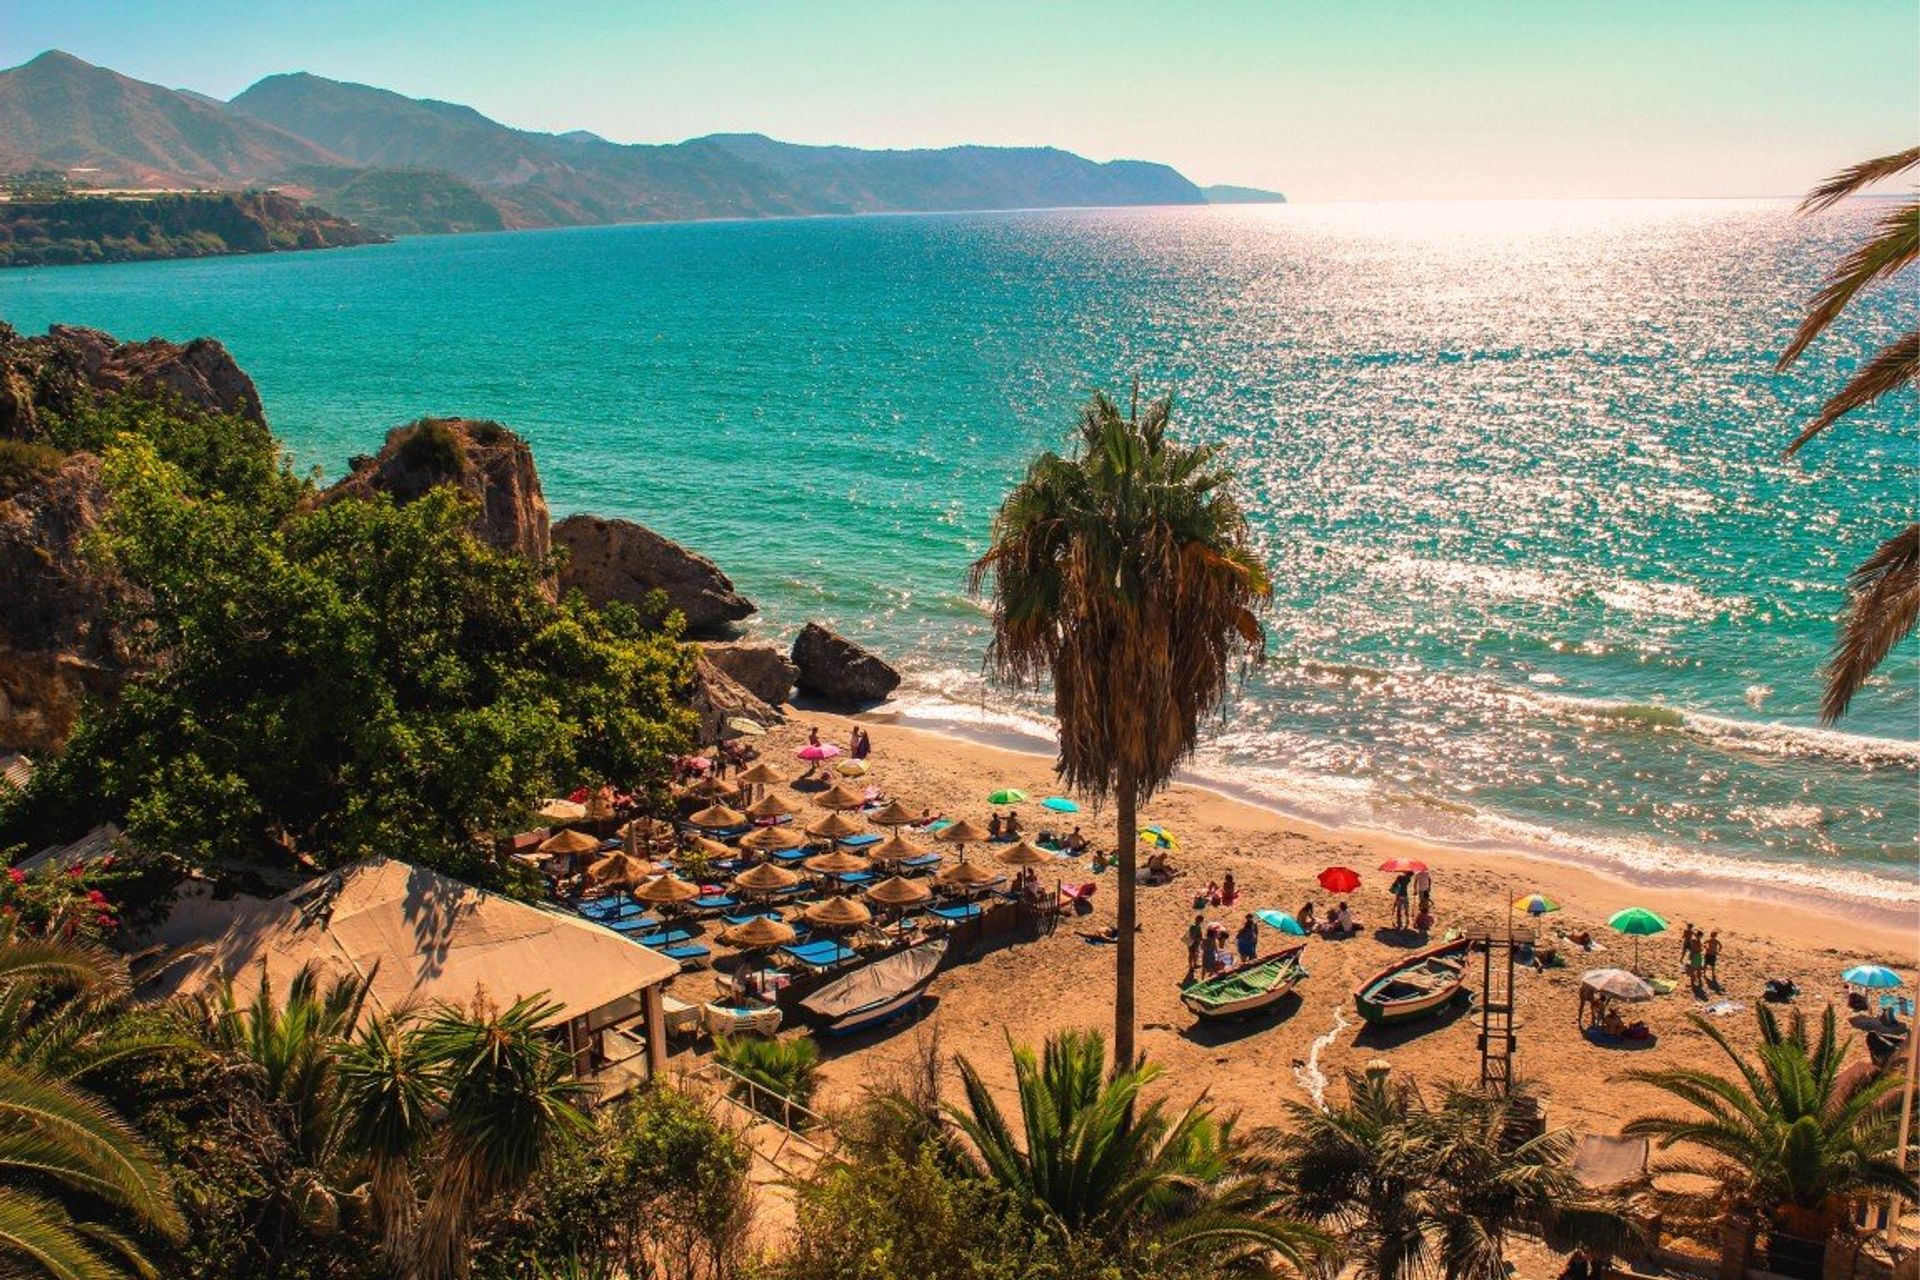 The glorious beaches of Nerja are less than an hour away by car